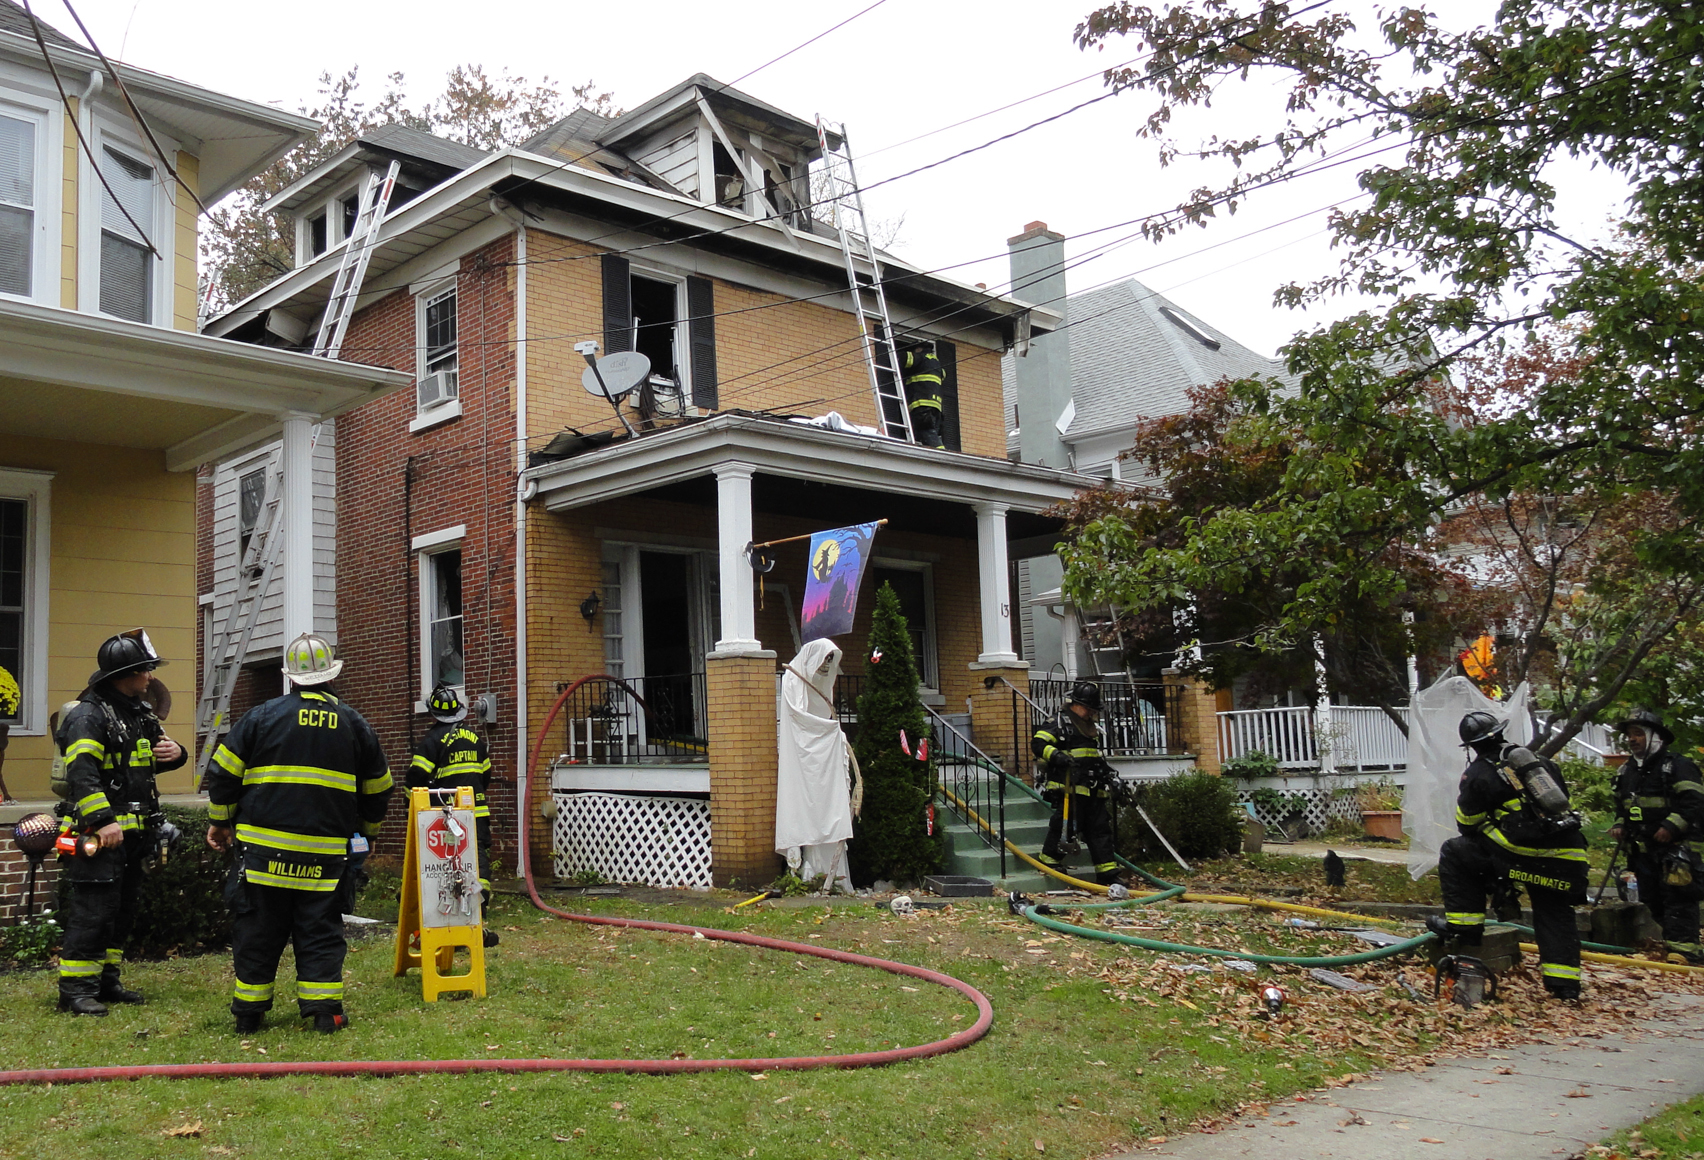 Firefighters wrap up at the scene of a Collingswood house fire. Credit: Matt Skoufalos.